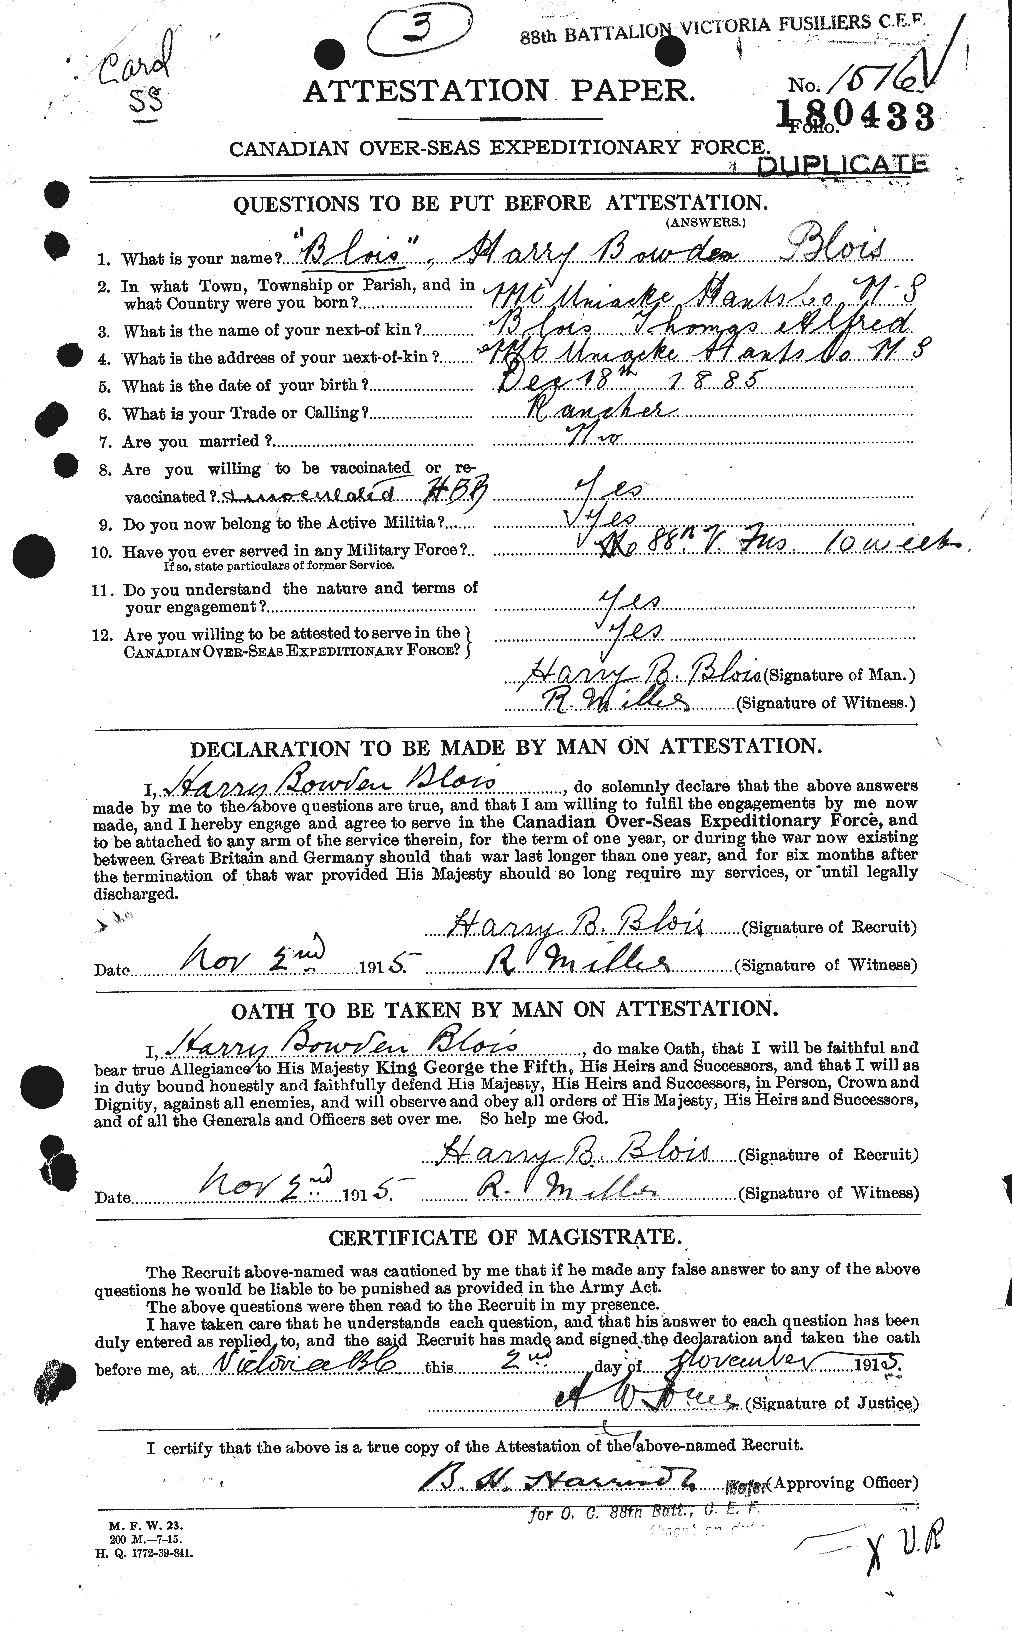 Personnel Records of the First World War - CEF 248450a